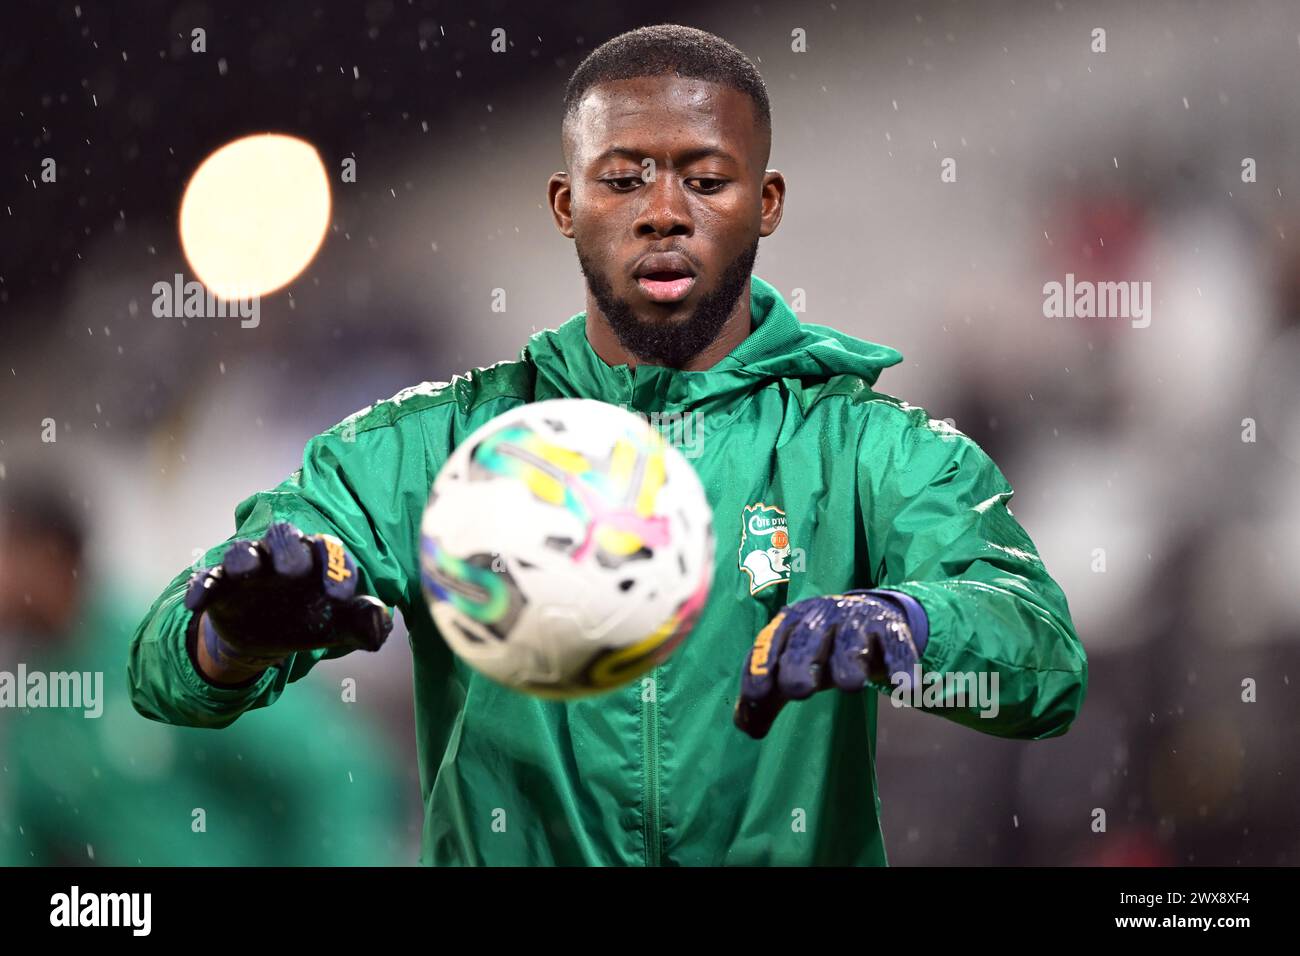 LENS - Ivory Coast goalkeeper Issa Fofana during the friendly Interland match between Ivory Coast and Uruguay at Stade Bollaert Delelis on March 26, 2024 in Lens, France. ANP | Hollandse Hoogte | GERRIT VAN COLOGNE Stock Photo